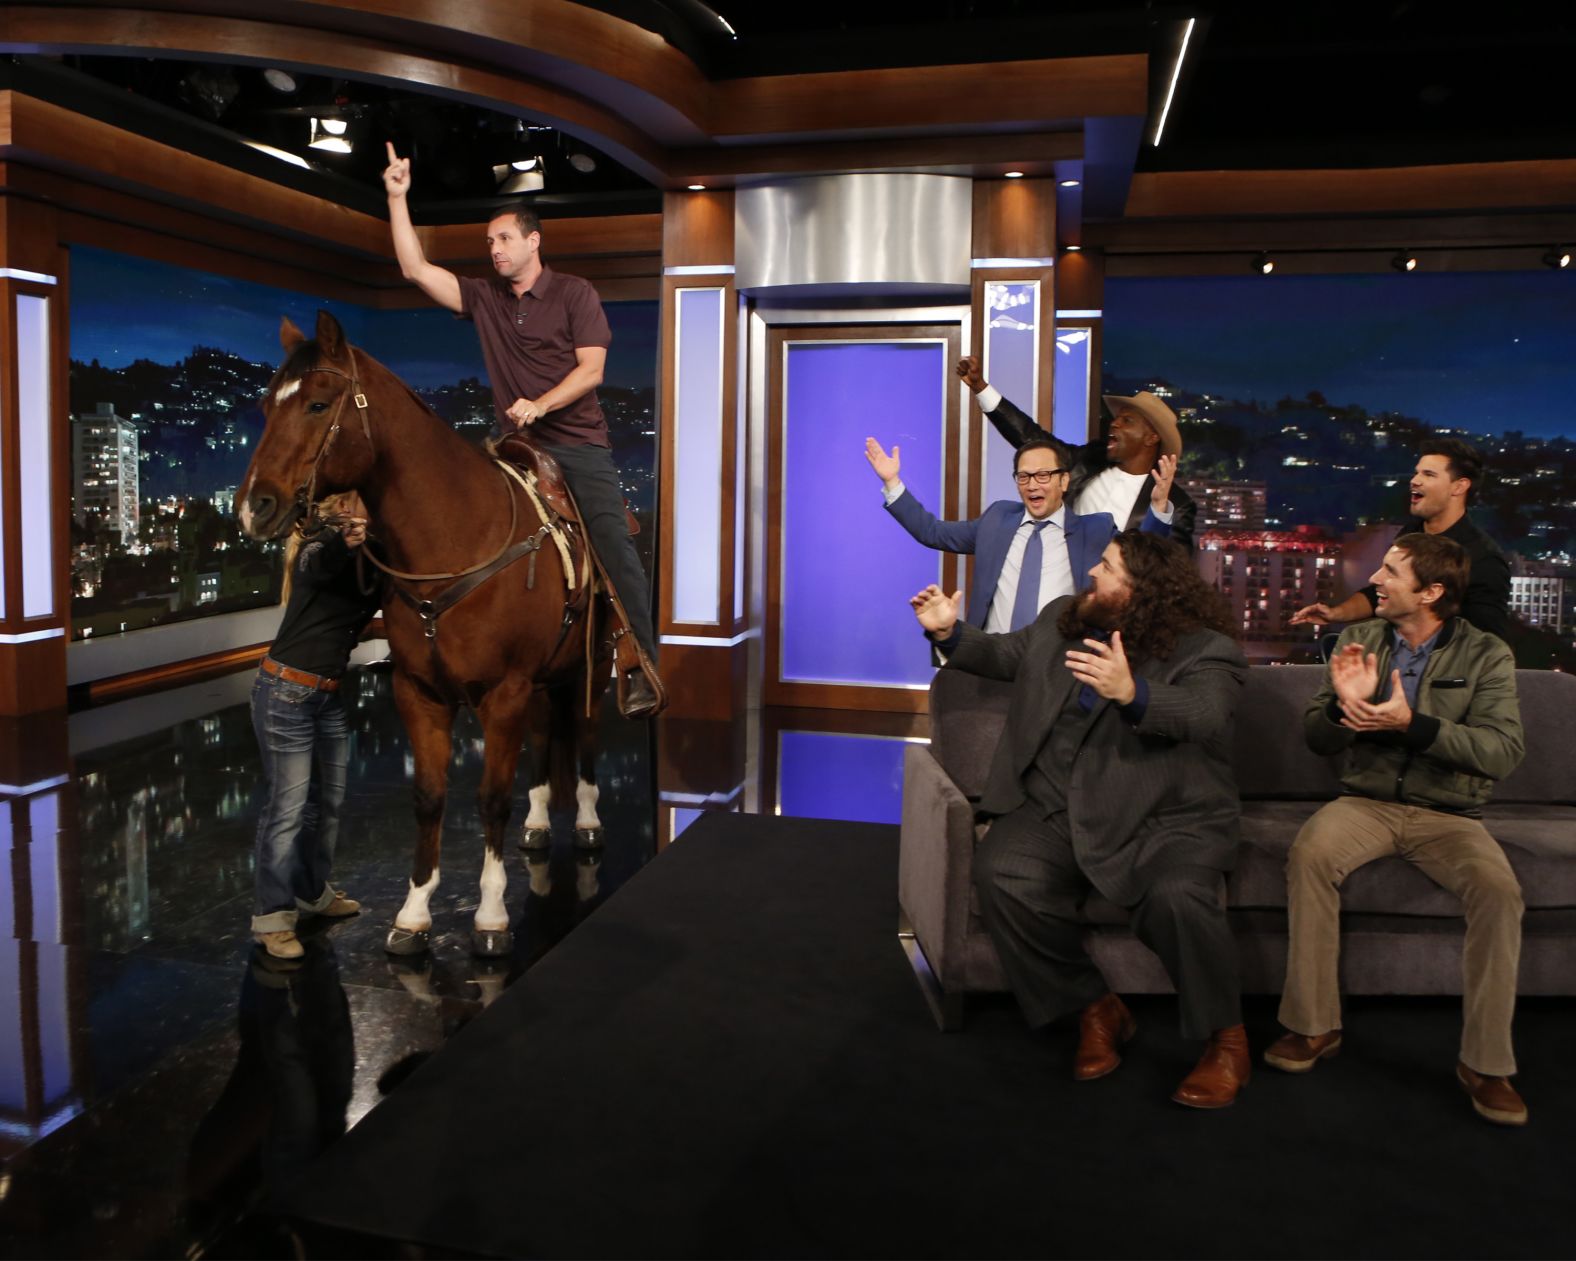 Sandler mounts a horse while appearing on "Jimmy Kimmel Live" to promote his new Western comedy, "The Ridiculous 6," in November 2015.